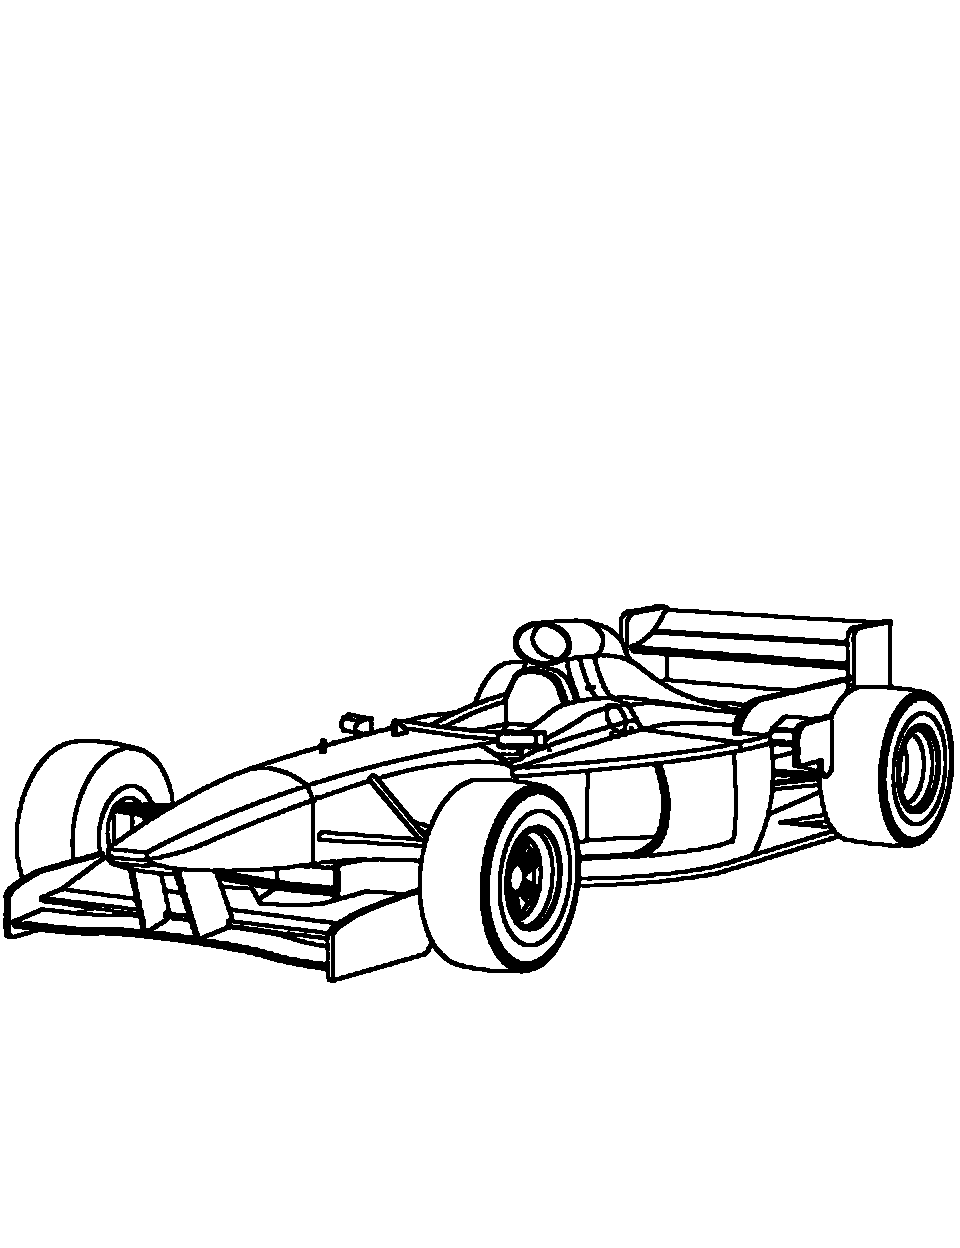 Cool Open Top Racer Race Car Coloring Page - A cool open-top race car.